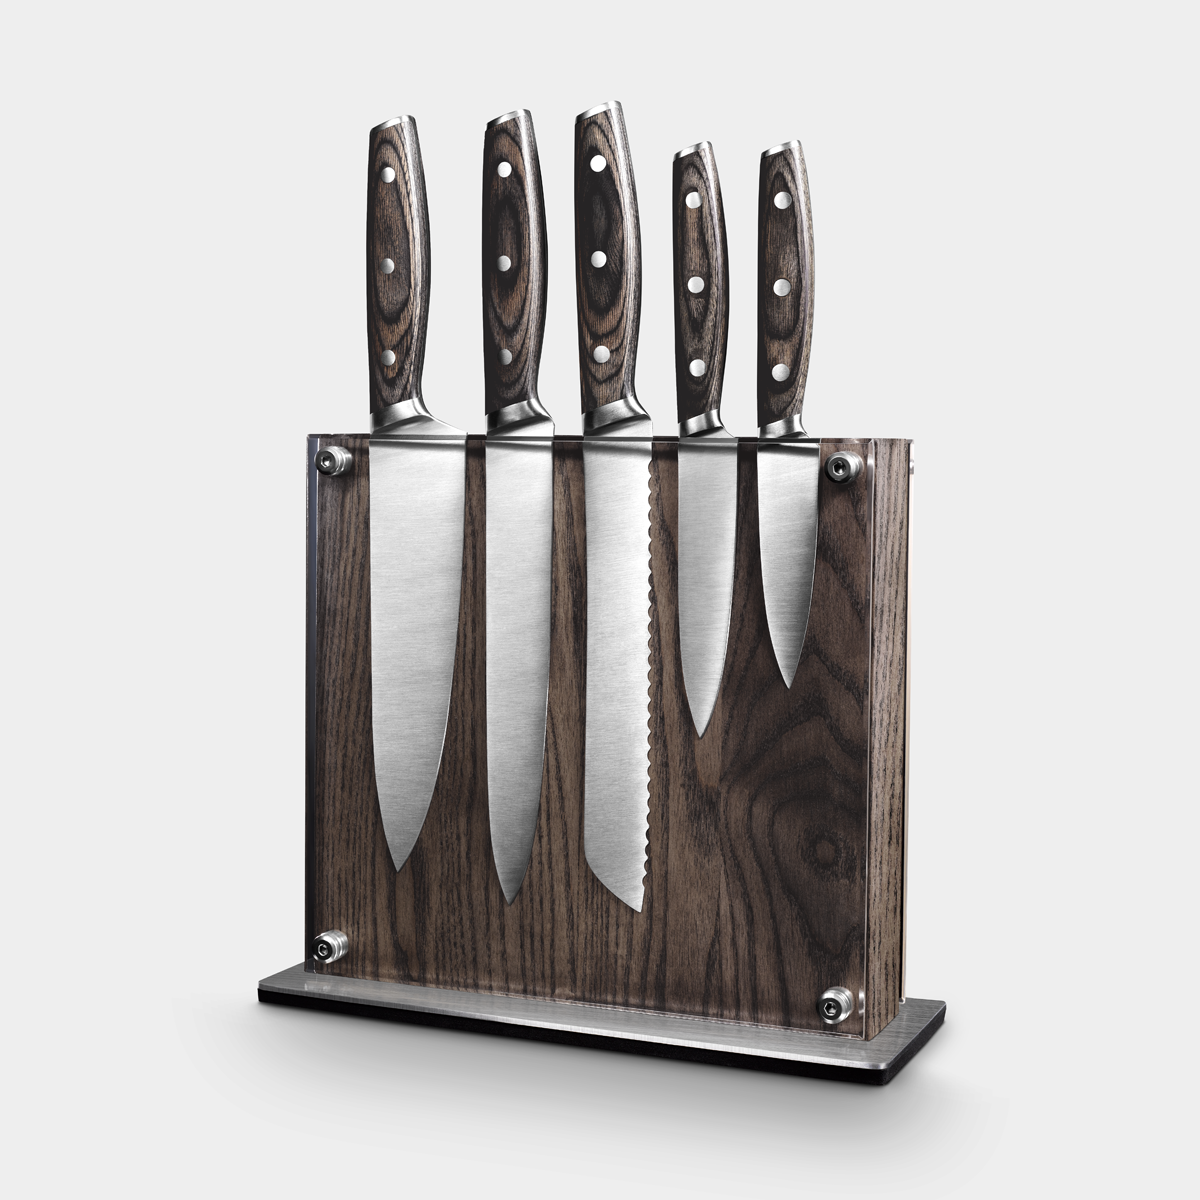 Classic Cuisine 10-Piece Multi Colored Knife Set with Magnetic Bar